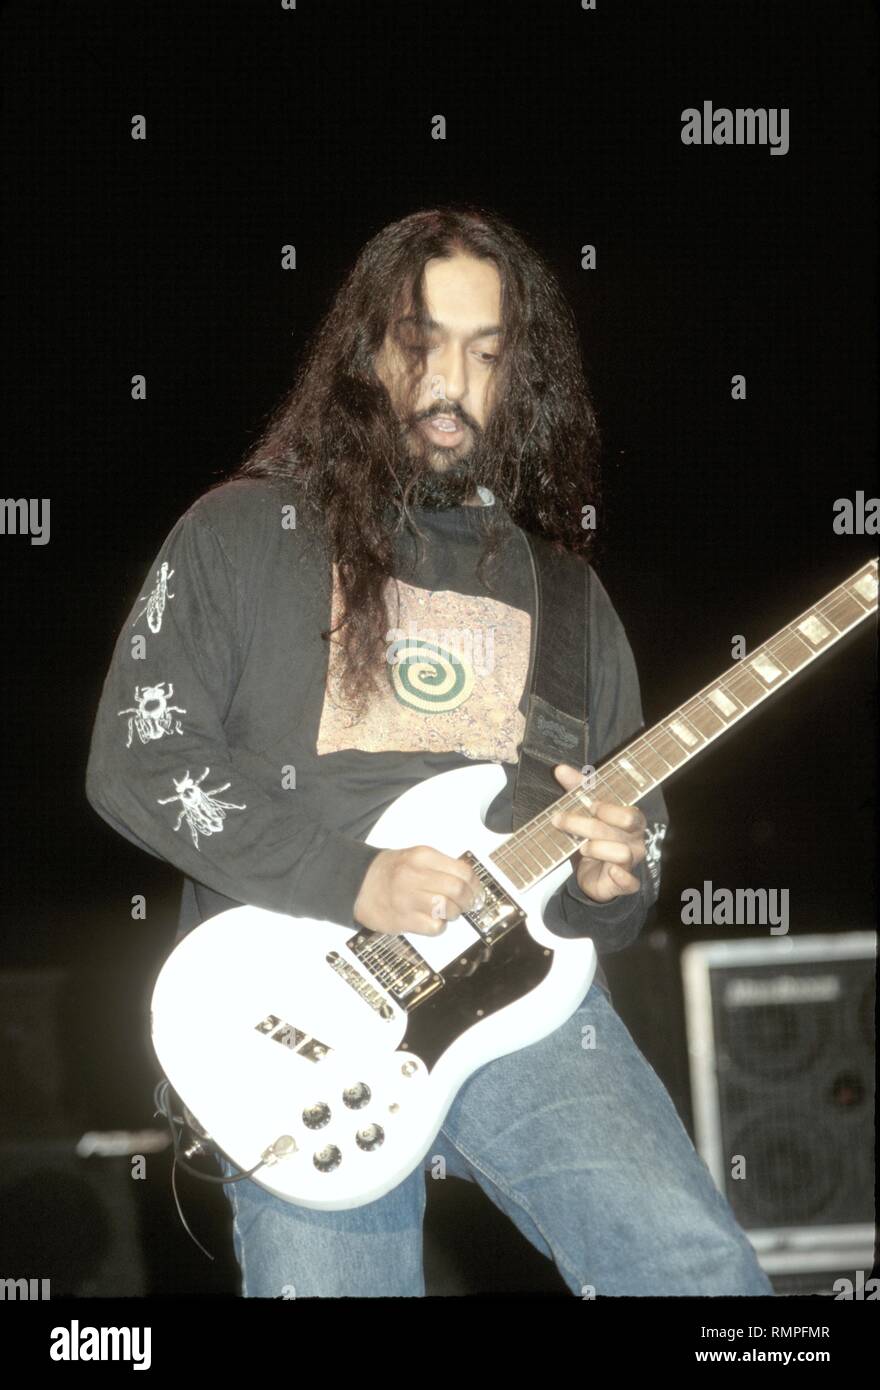 Guitarist Kim Thayil of the rock band Soundgarden is shown performing on stage during a "live" concert appearance. Stock Photo